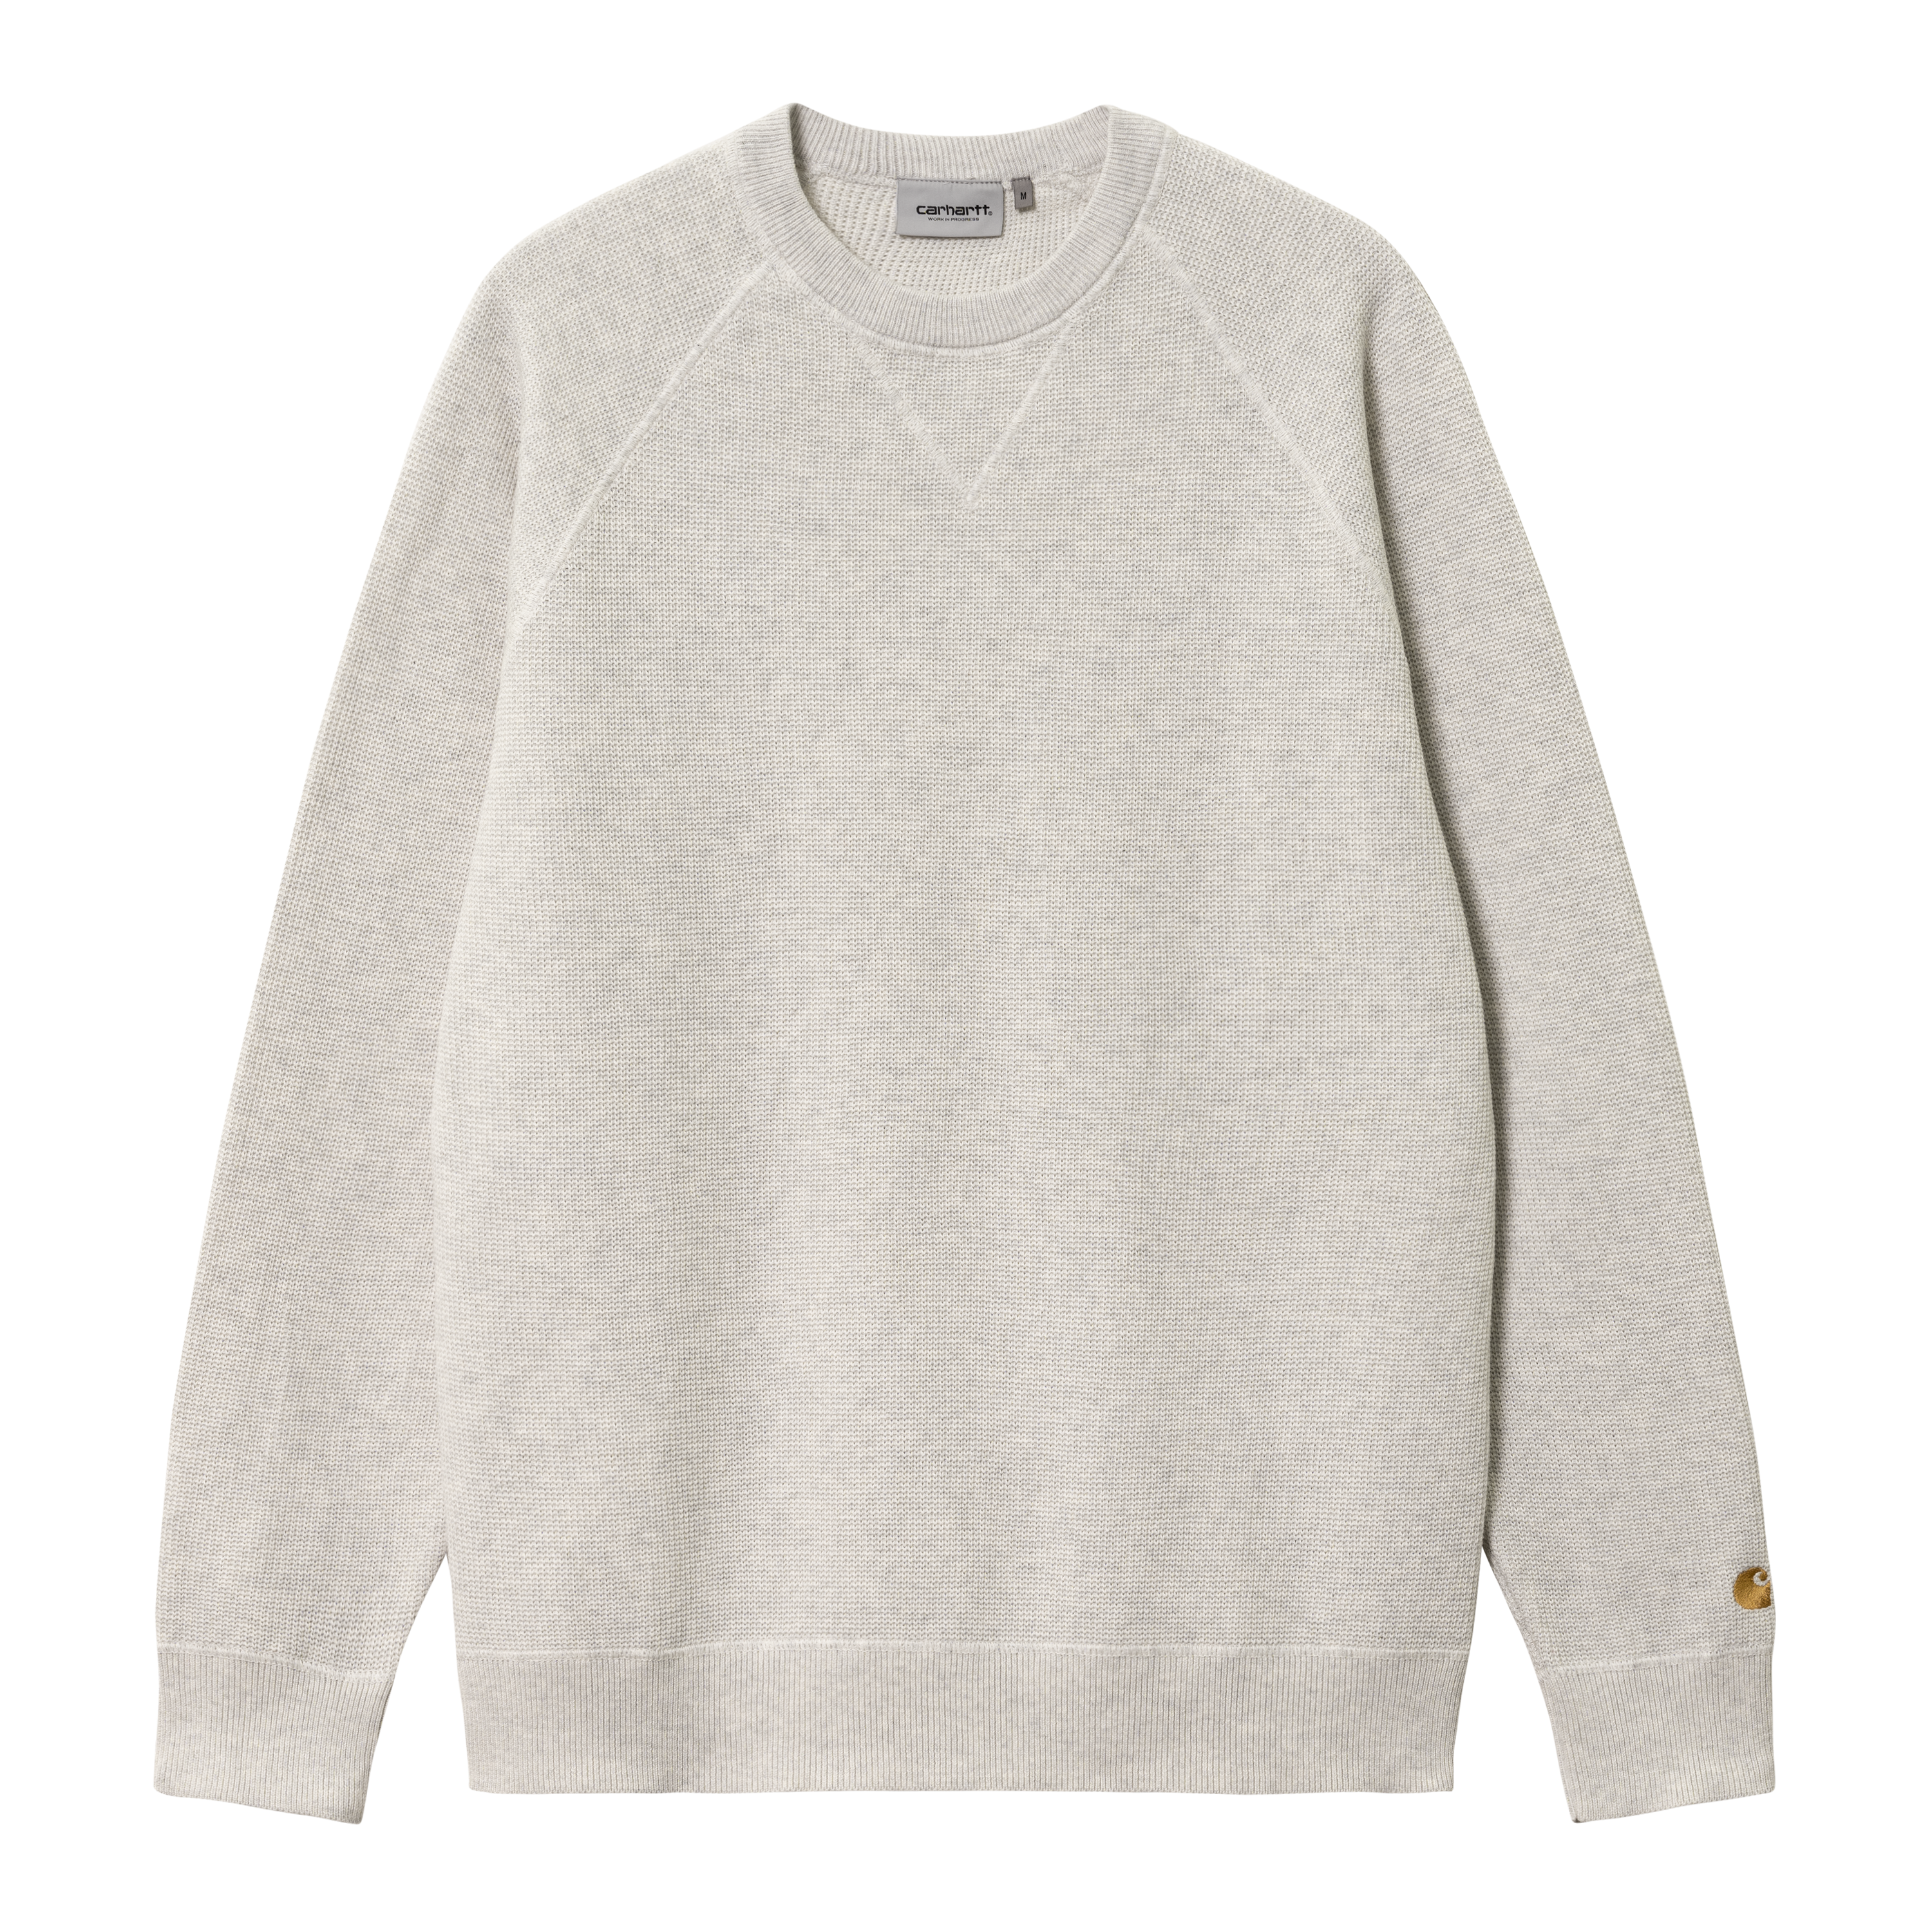 Carhartt WIP Chase Sweater in Grigio